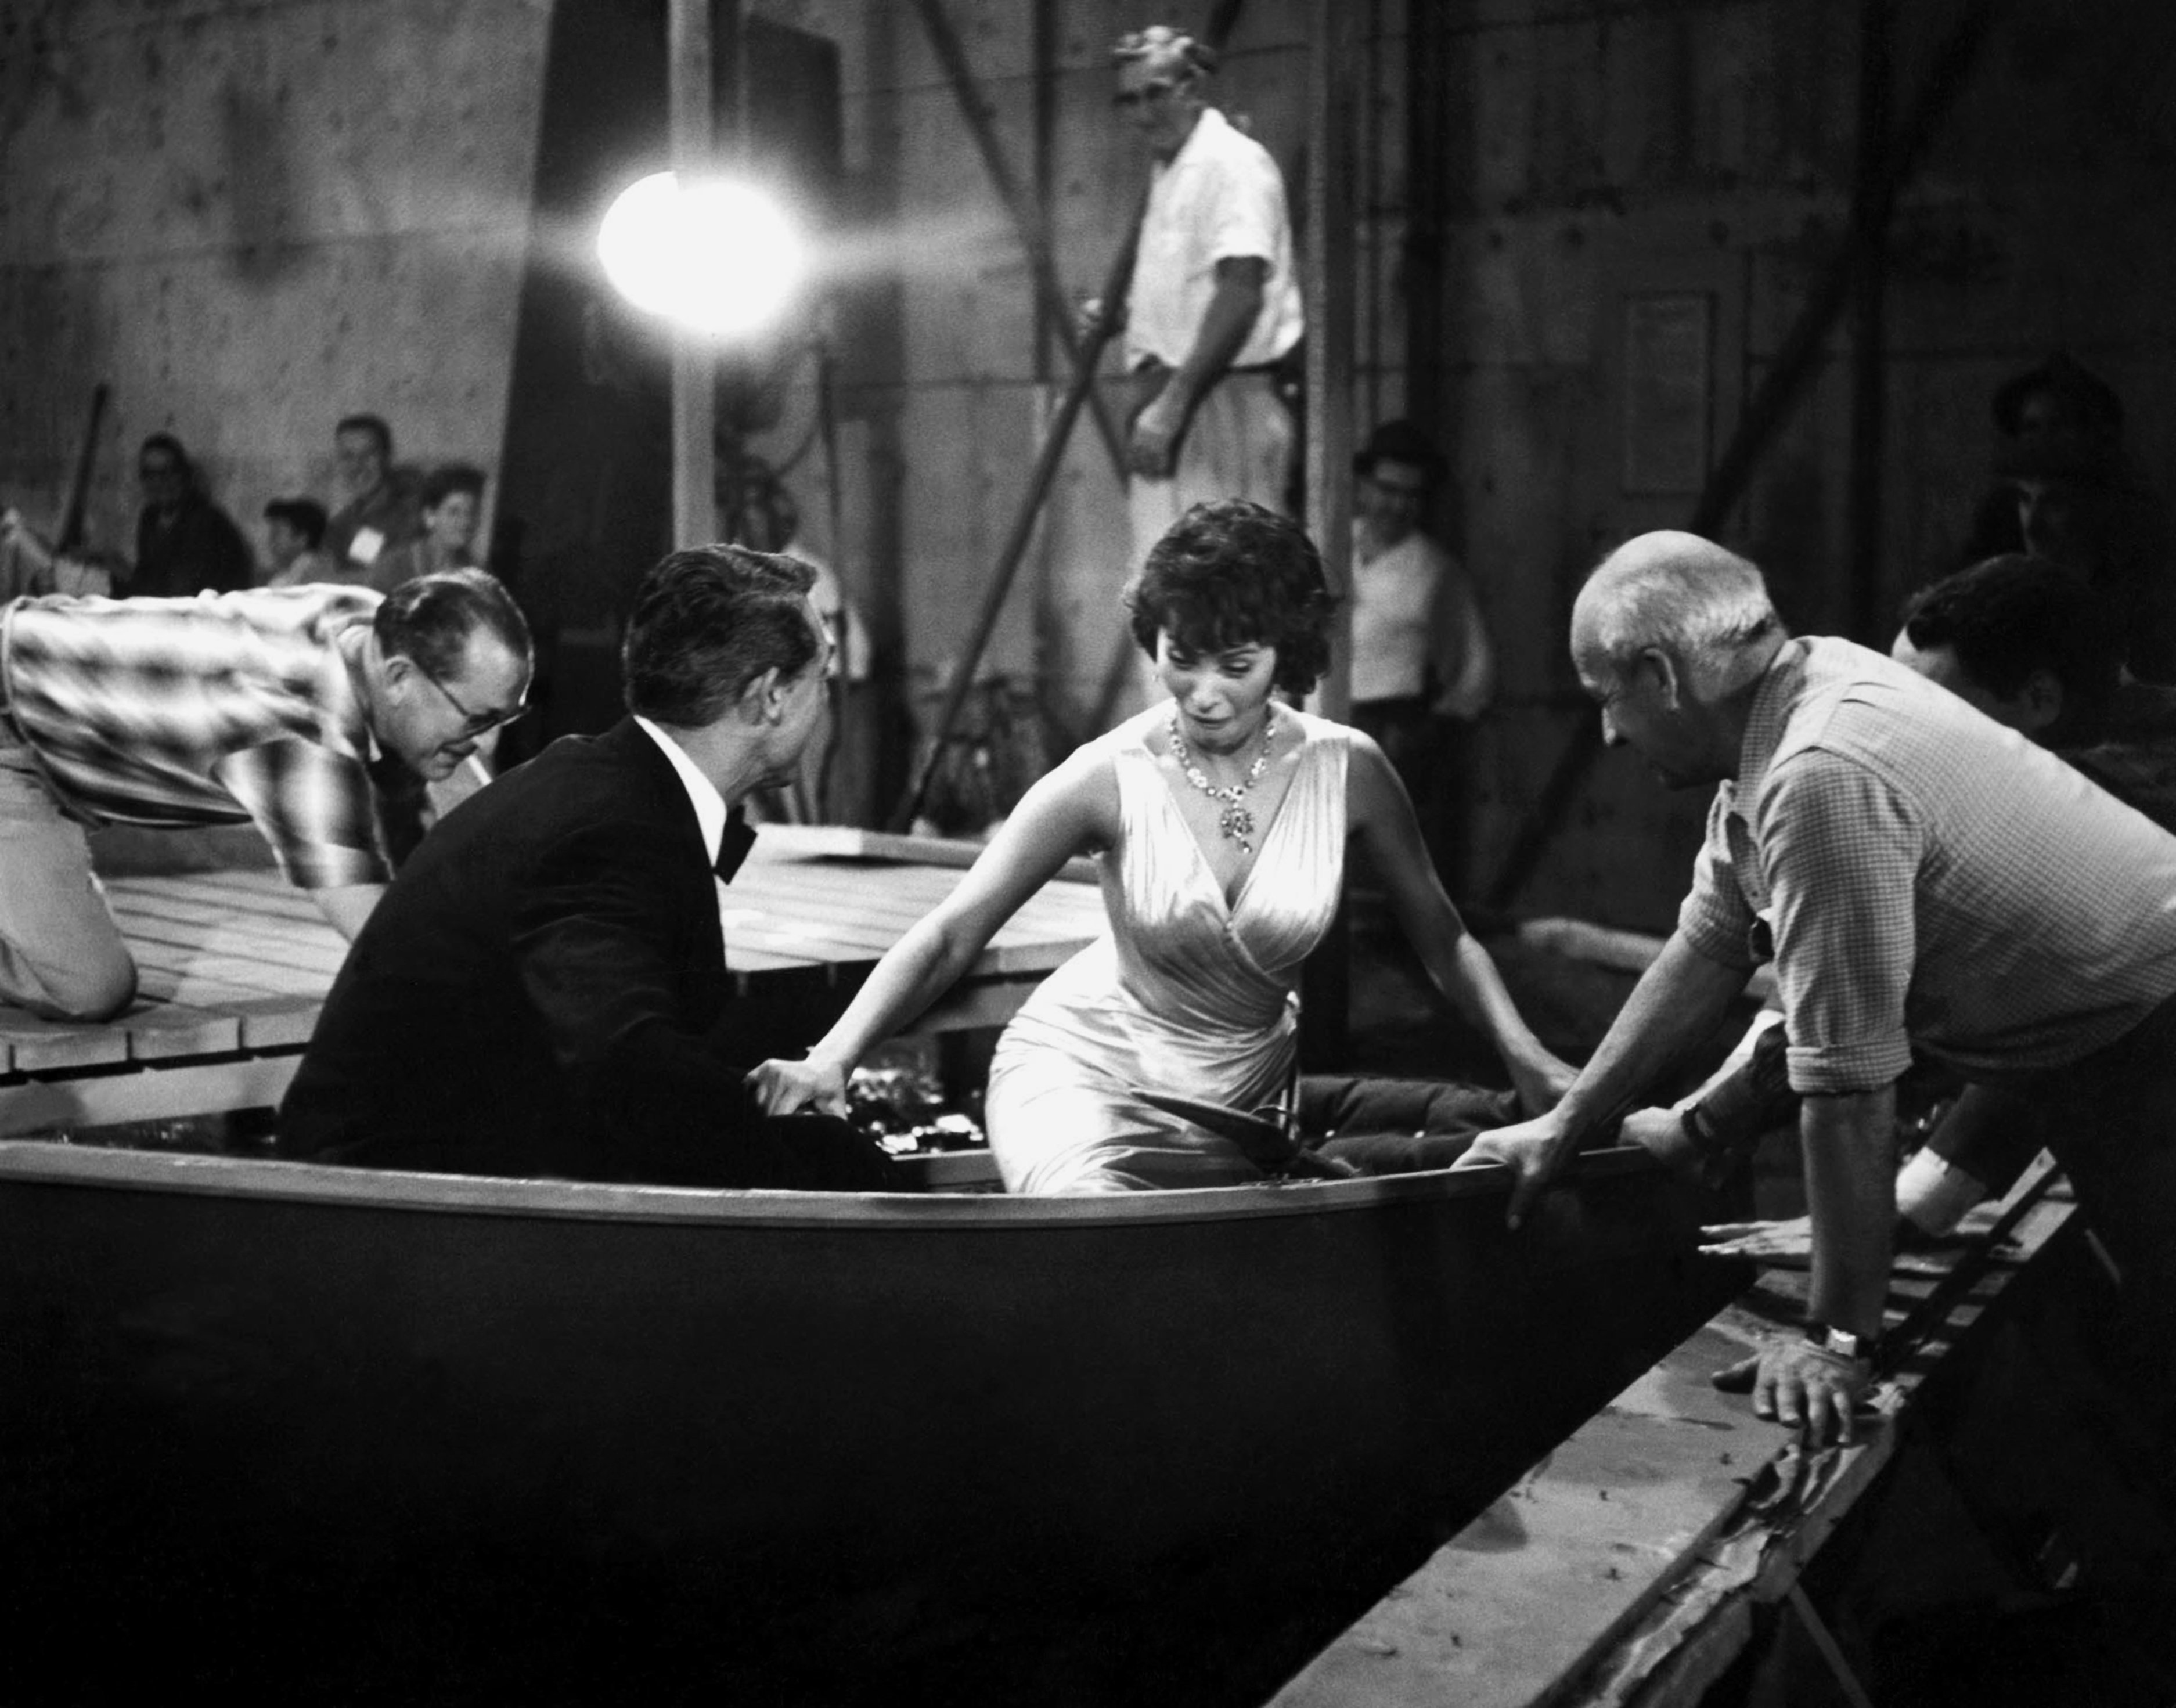 Veteran stars Cary Grant and Sophia Loren in a scene from the movie "Houseboat" in 1958. | Photo: Getty Images